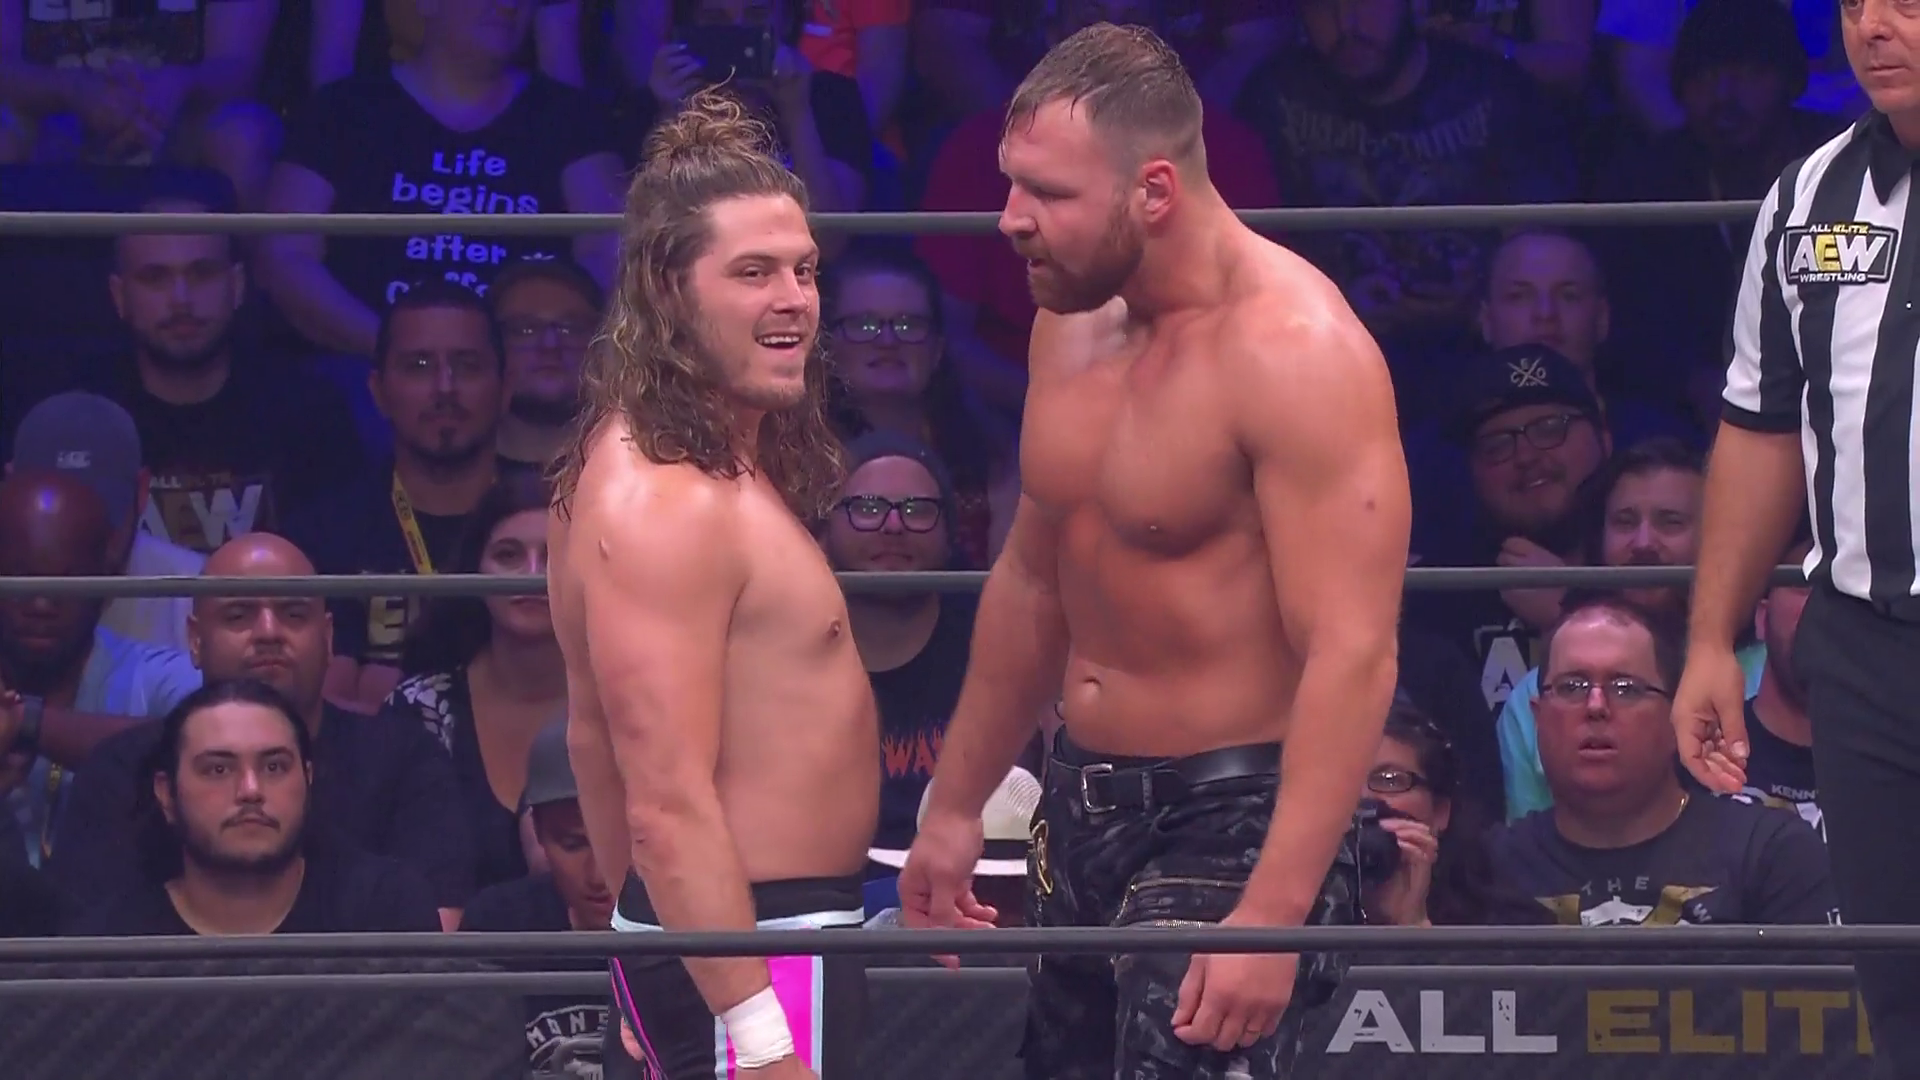 Jon Moxley and Joey Janela square off